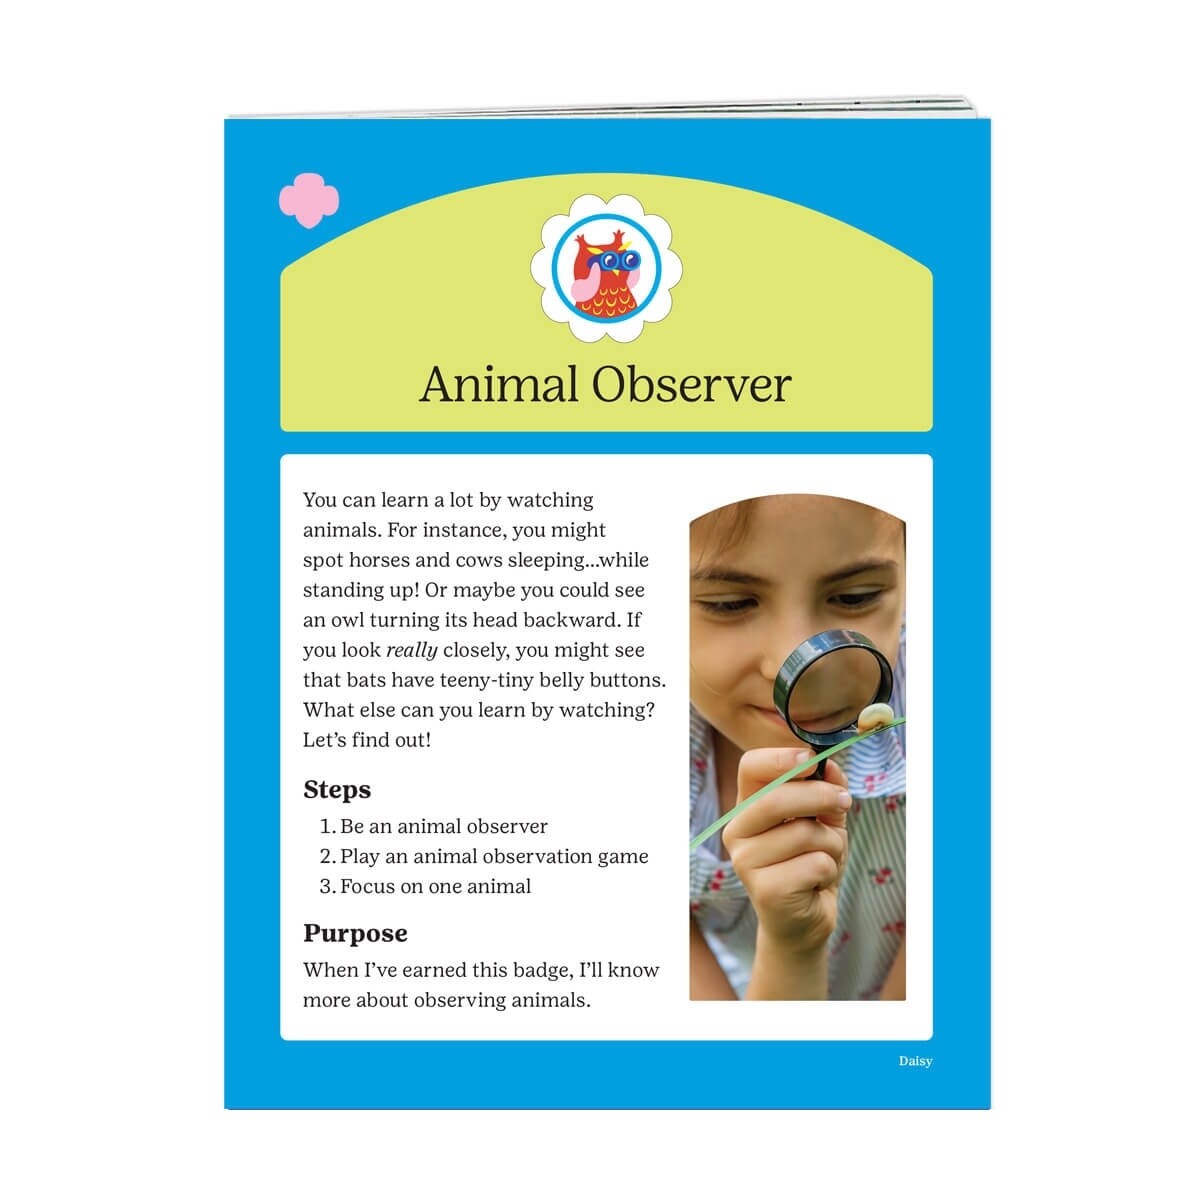 Daisy Animal Observer Badge Requirements